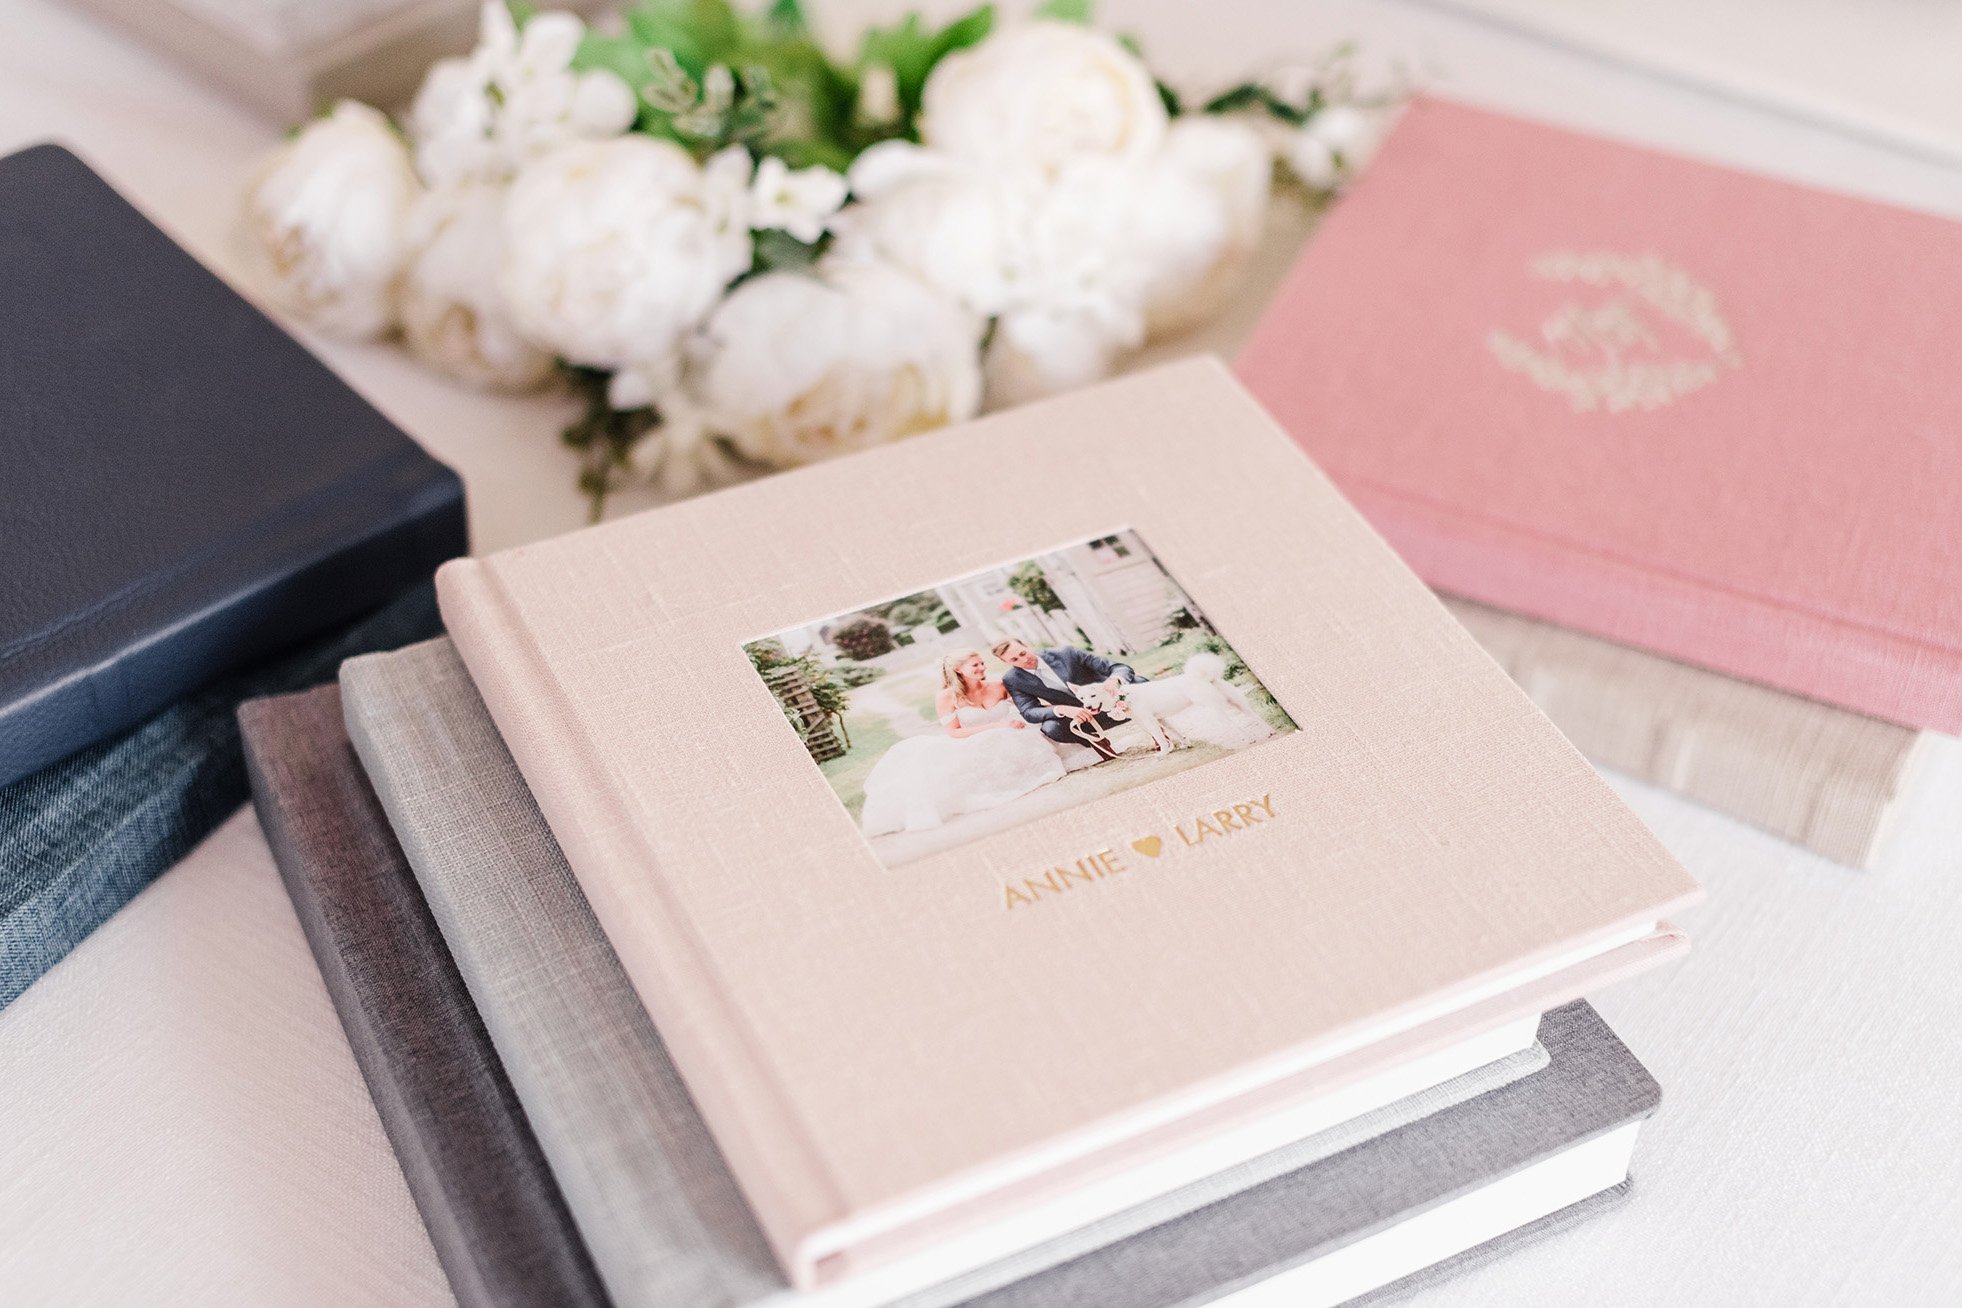 Classic, Archival Photo Album - a personalized photo book - by